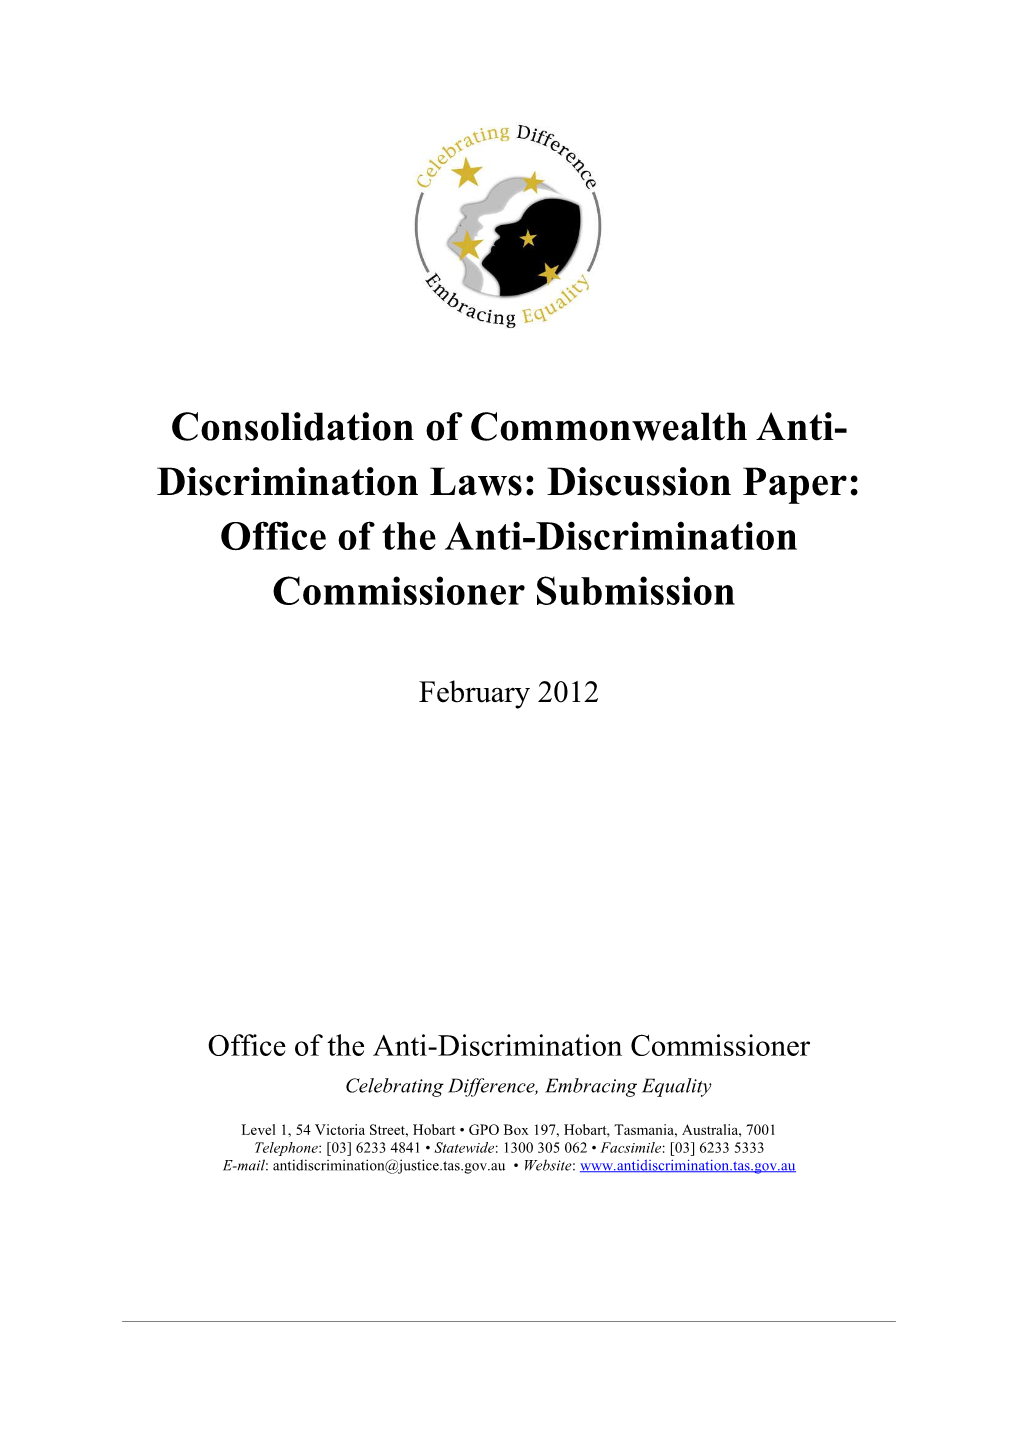 Submission on the Consolidation of Commonwealth Anti-Discrimination Laws - Office of The